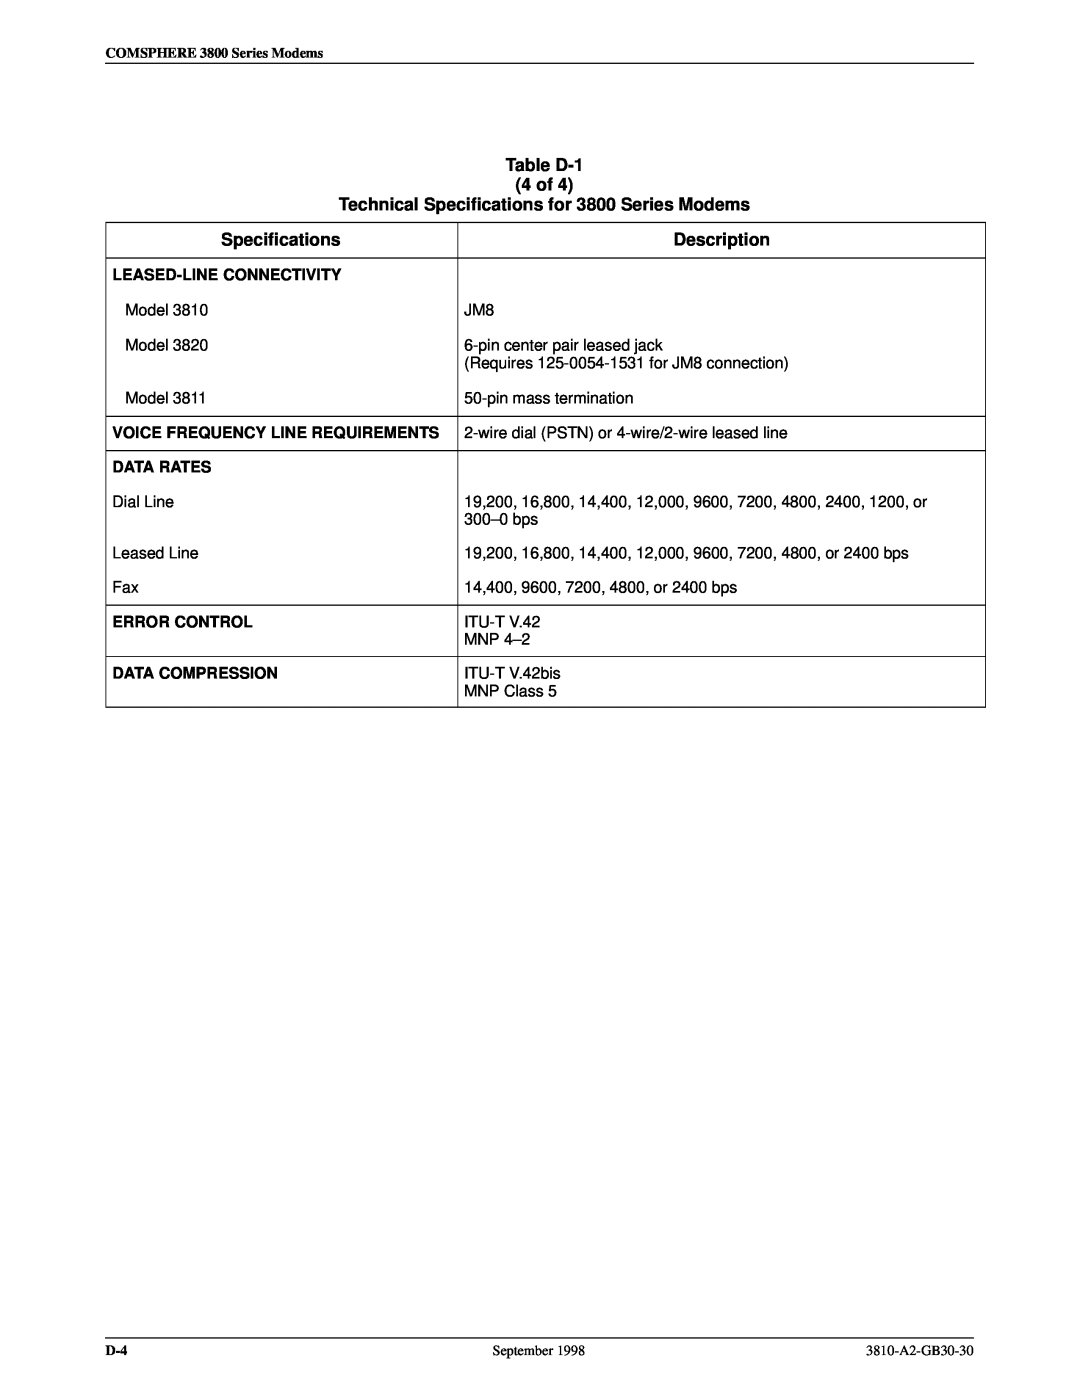 Paradyne manual Table D-1 4 of Technical Specifications for 3800 Series Modems, Description, Leased-Line Connectivity 